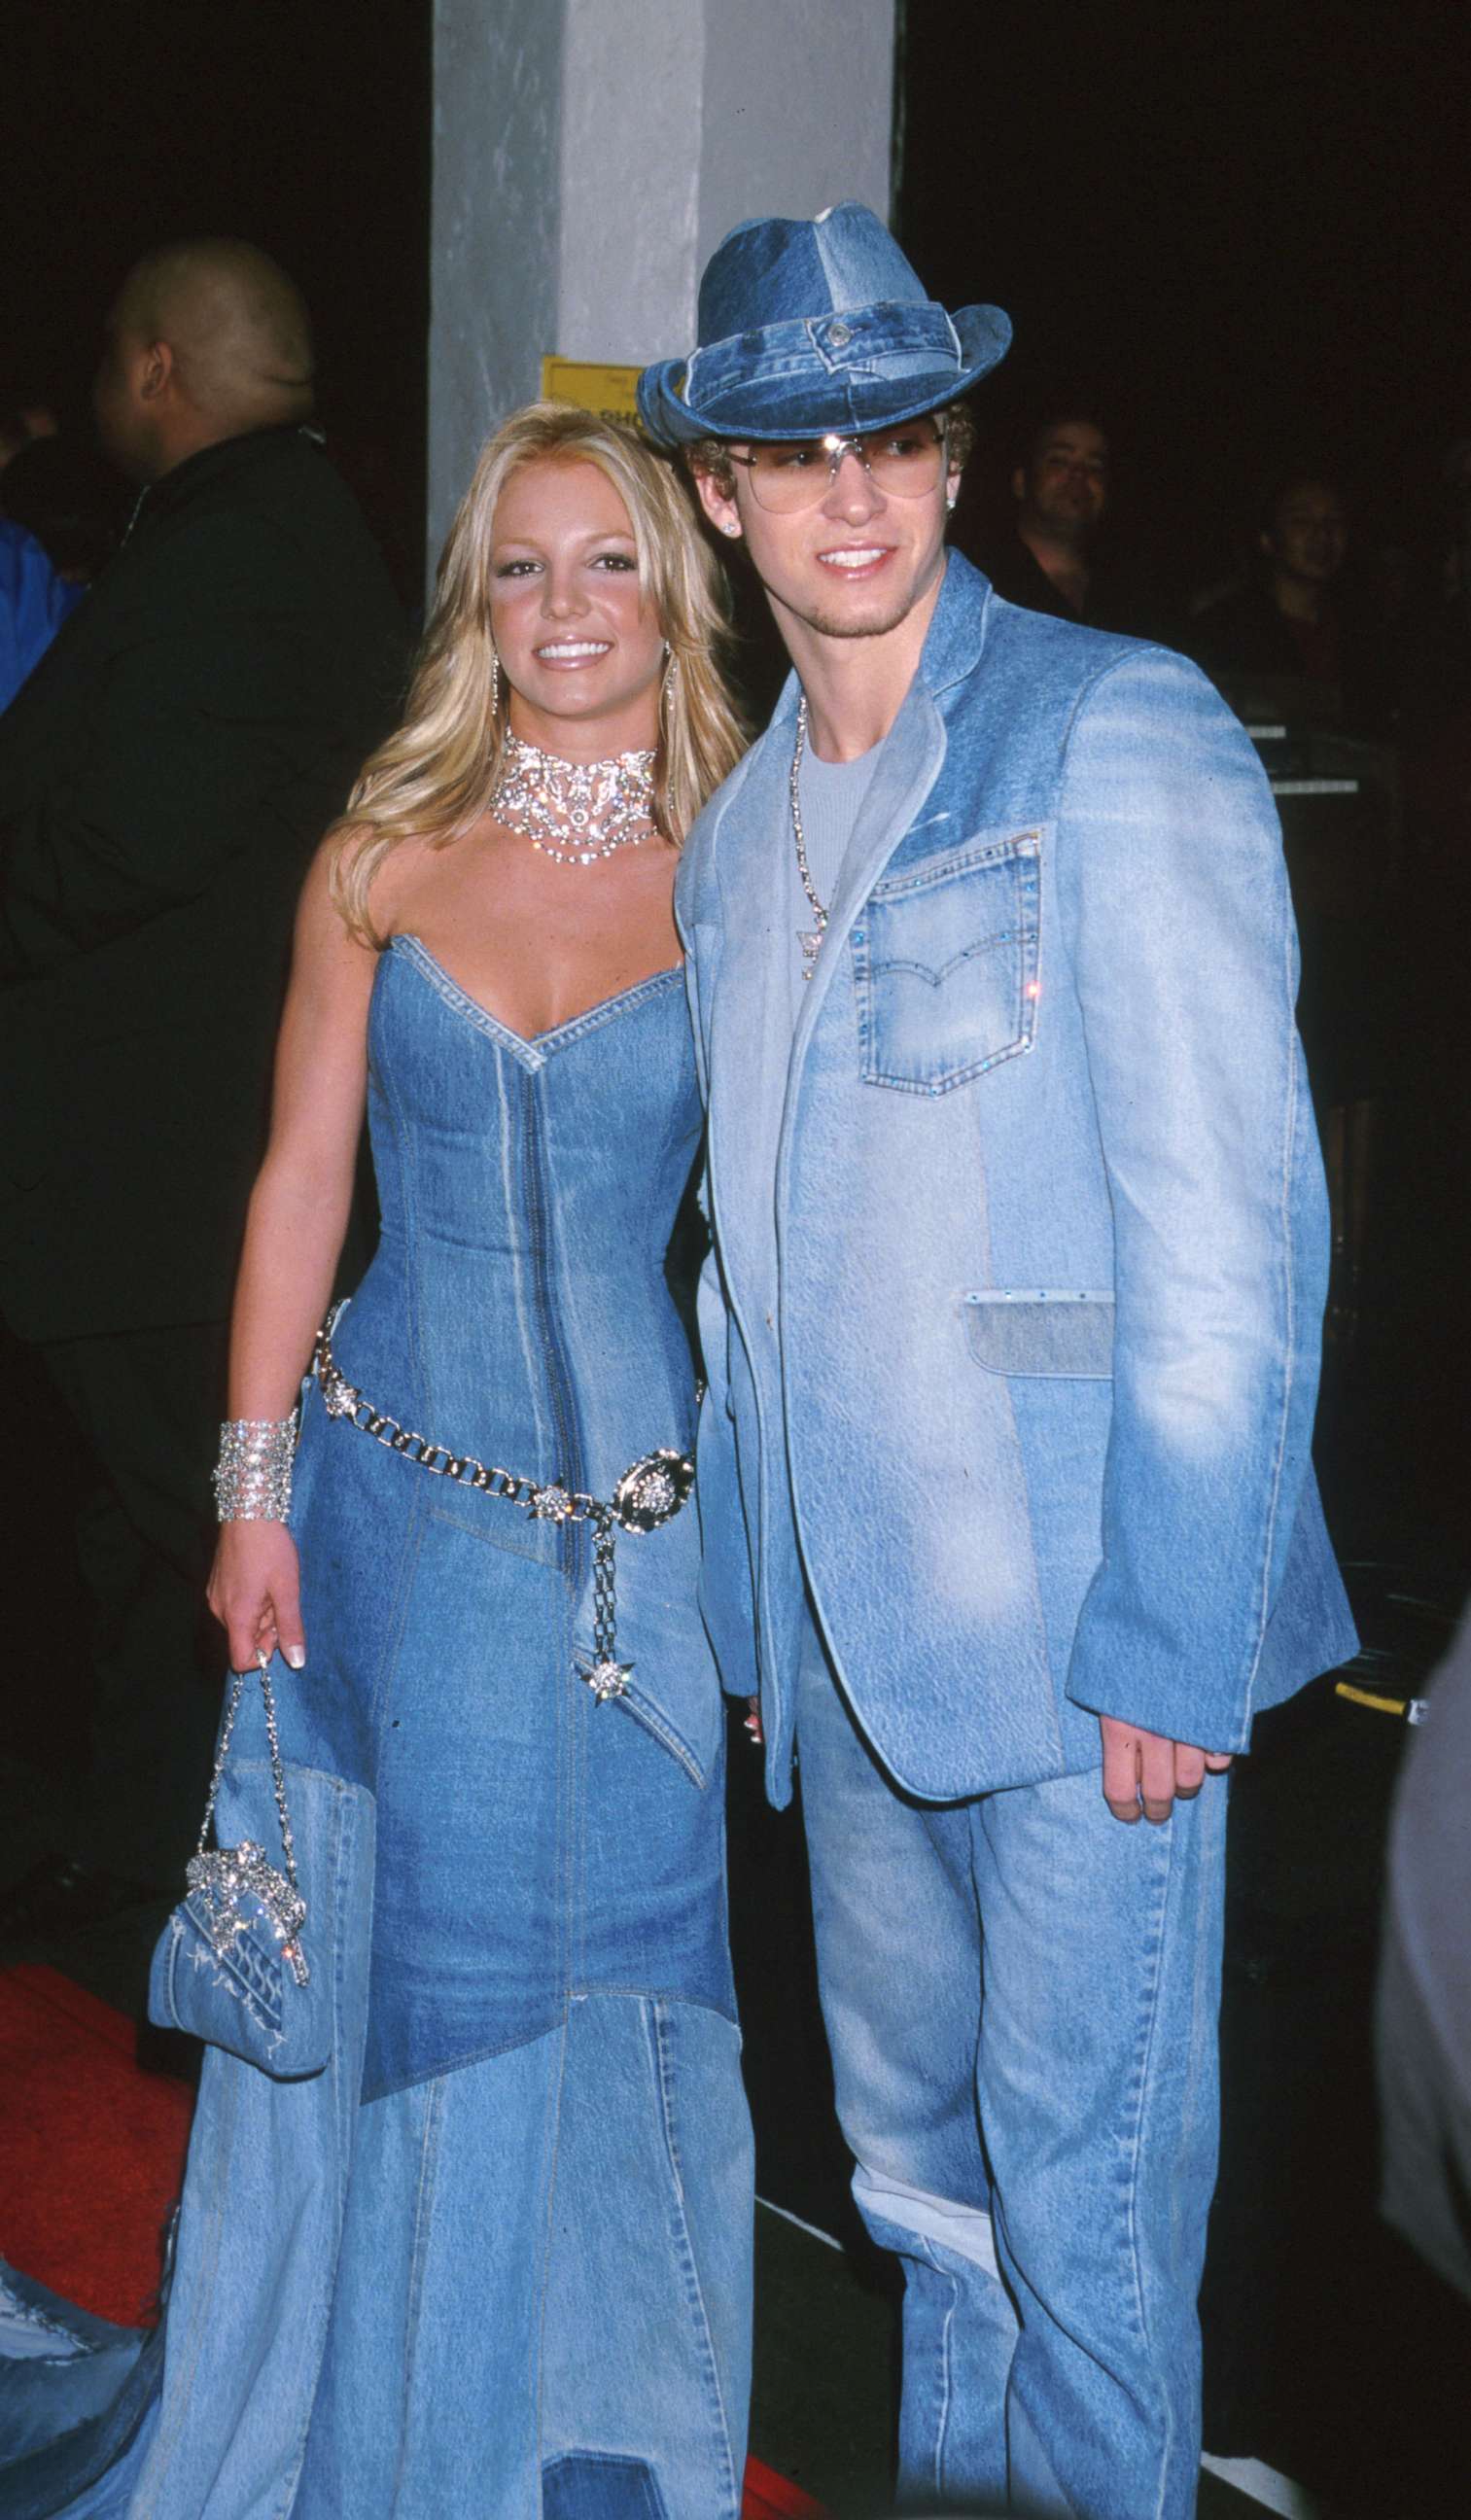 PHOTO: In this Jan. 8, 2001, file photo, Britney Spears & Justin Timberlake appear at the American Music Awards in Los Angeles..